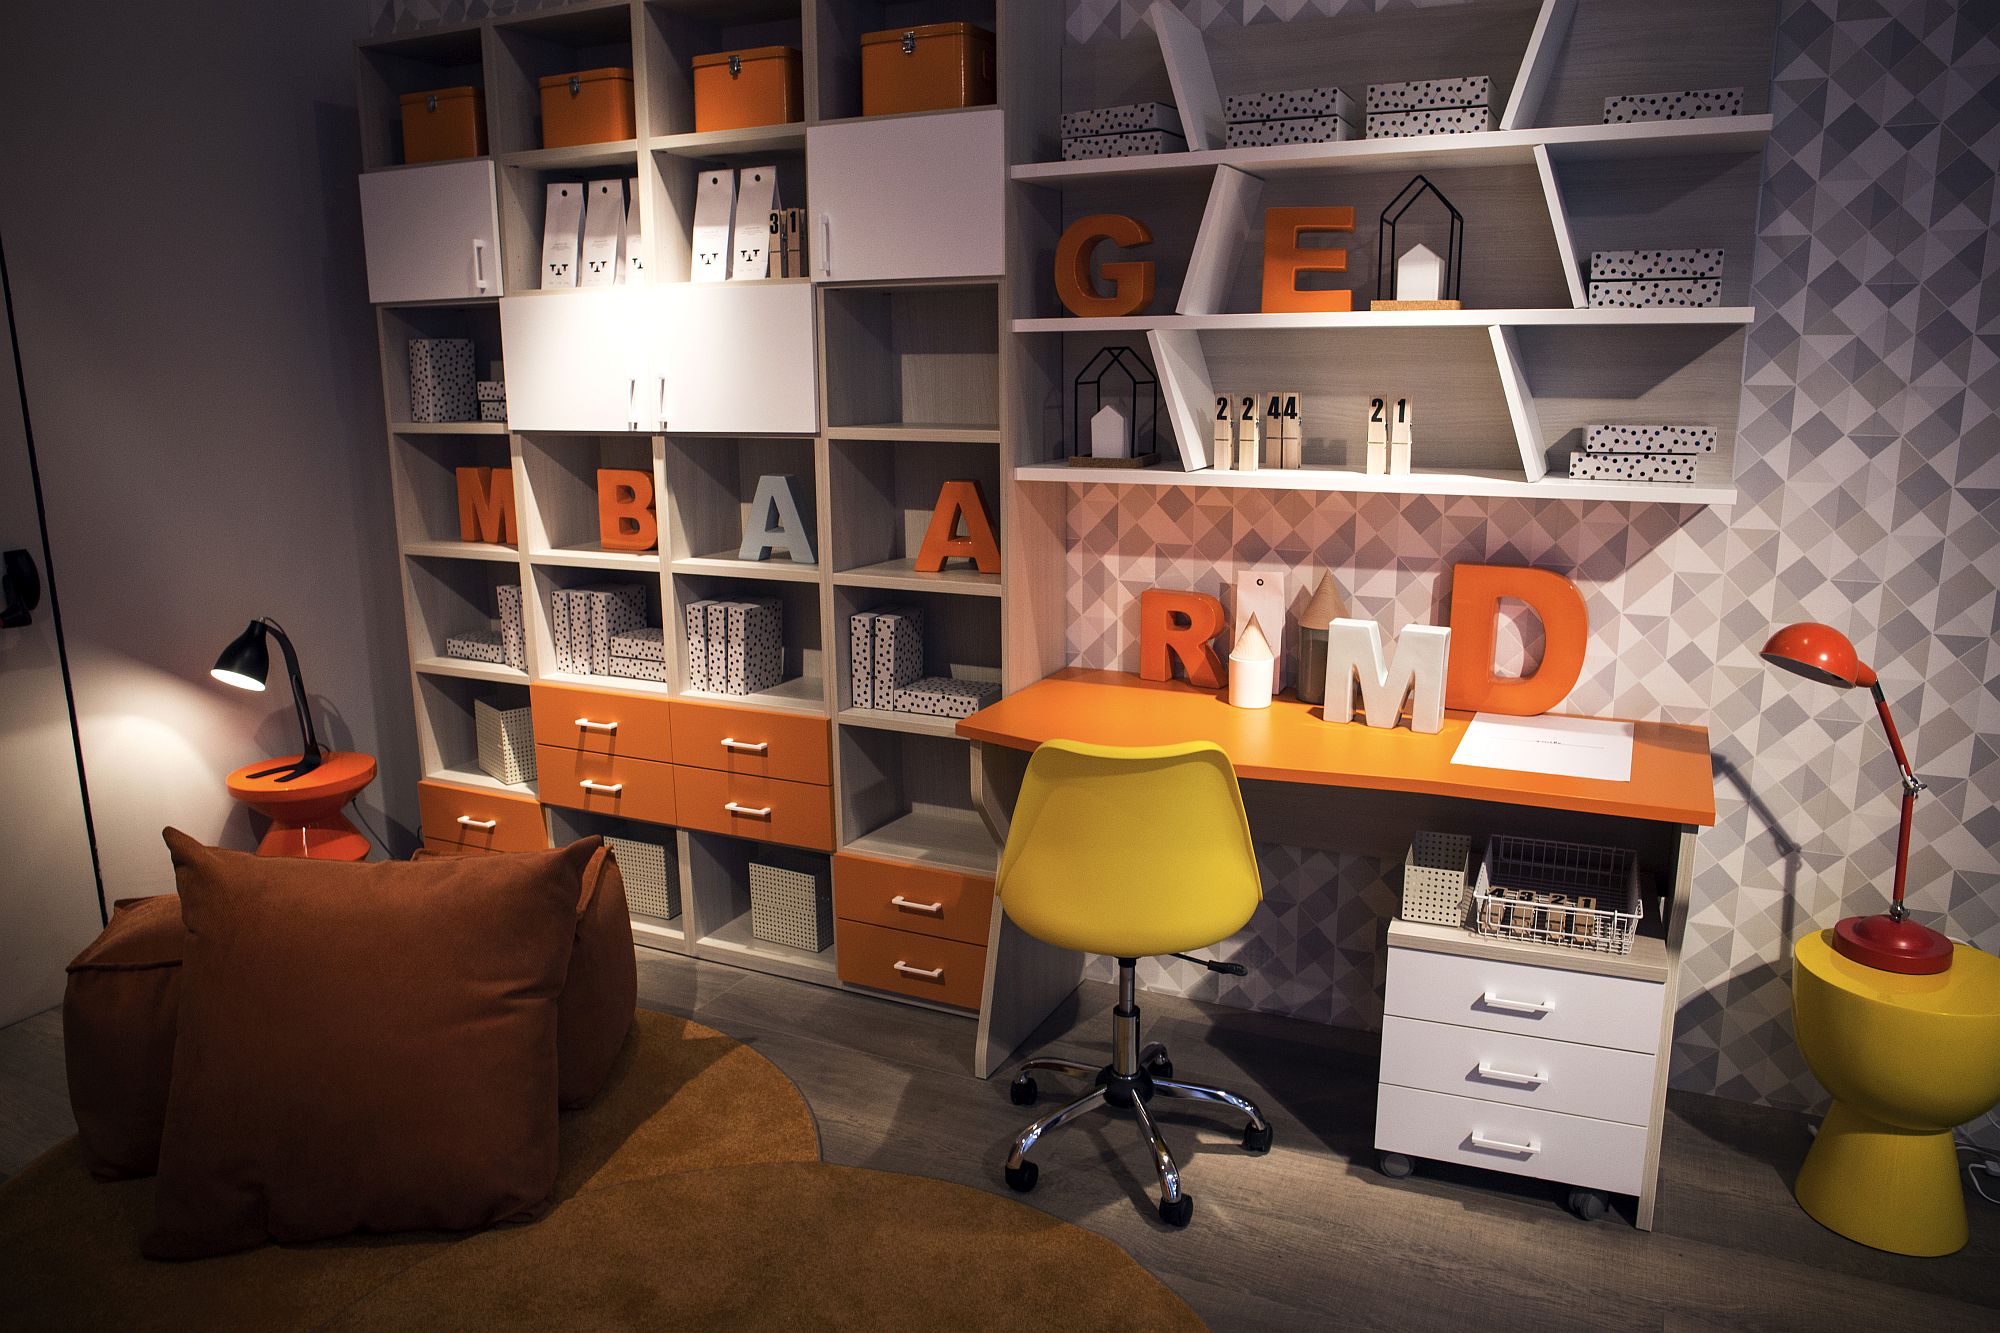 Modular-shelving-coupled-with-smart-workstation-and-pops-of-yellow-and-orange